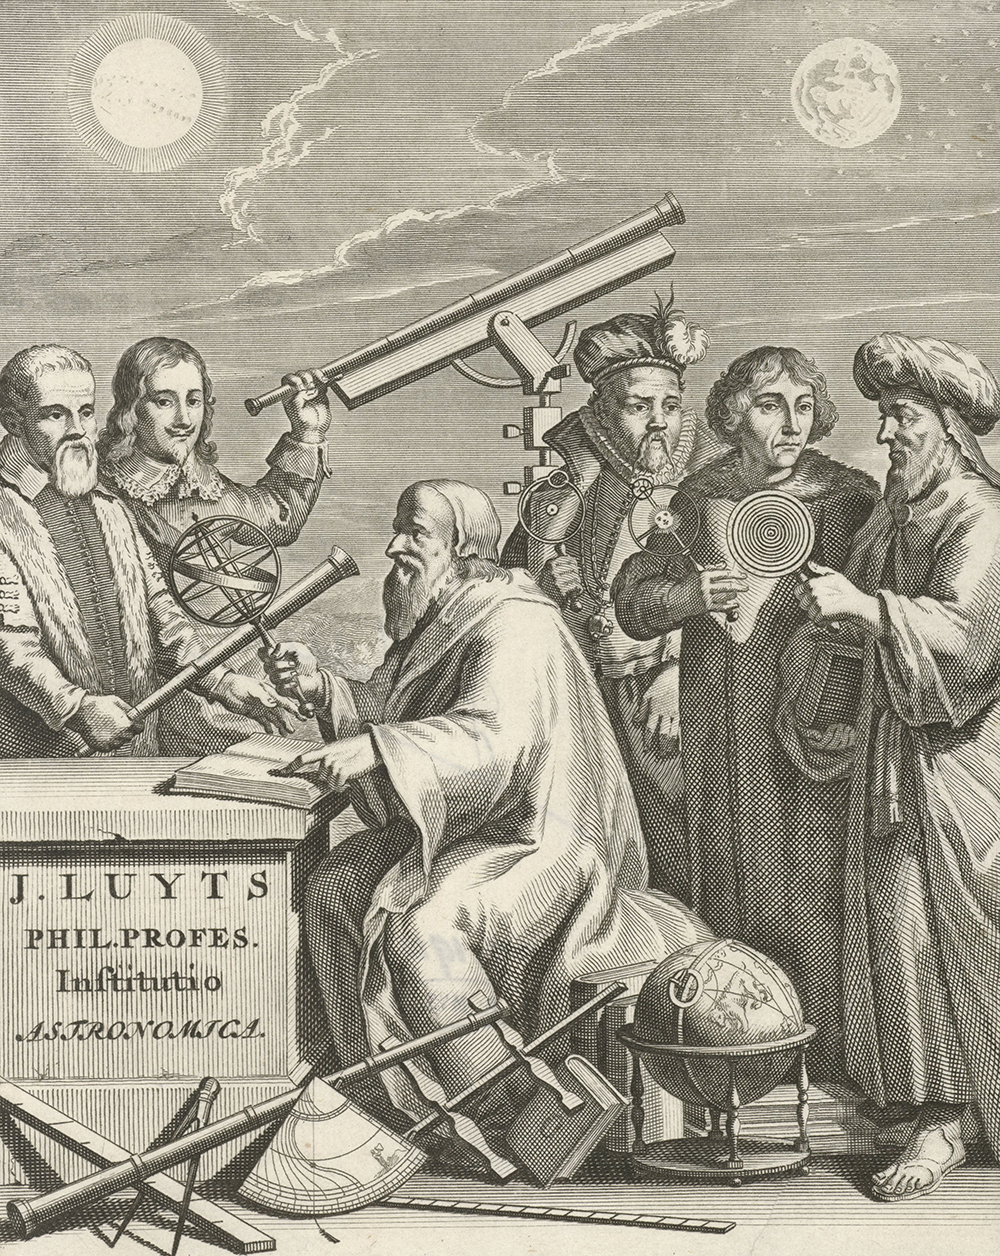 The astronomers, by Joseph Mulder, 1692. Rijksmuseum.